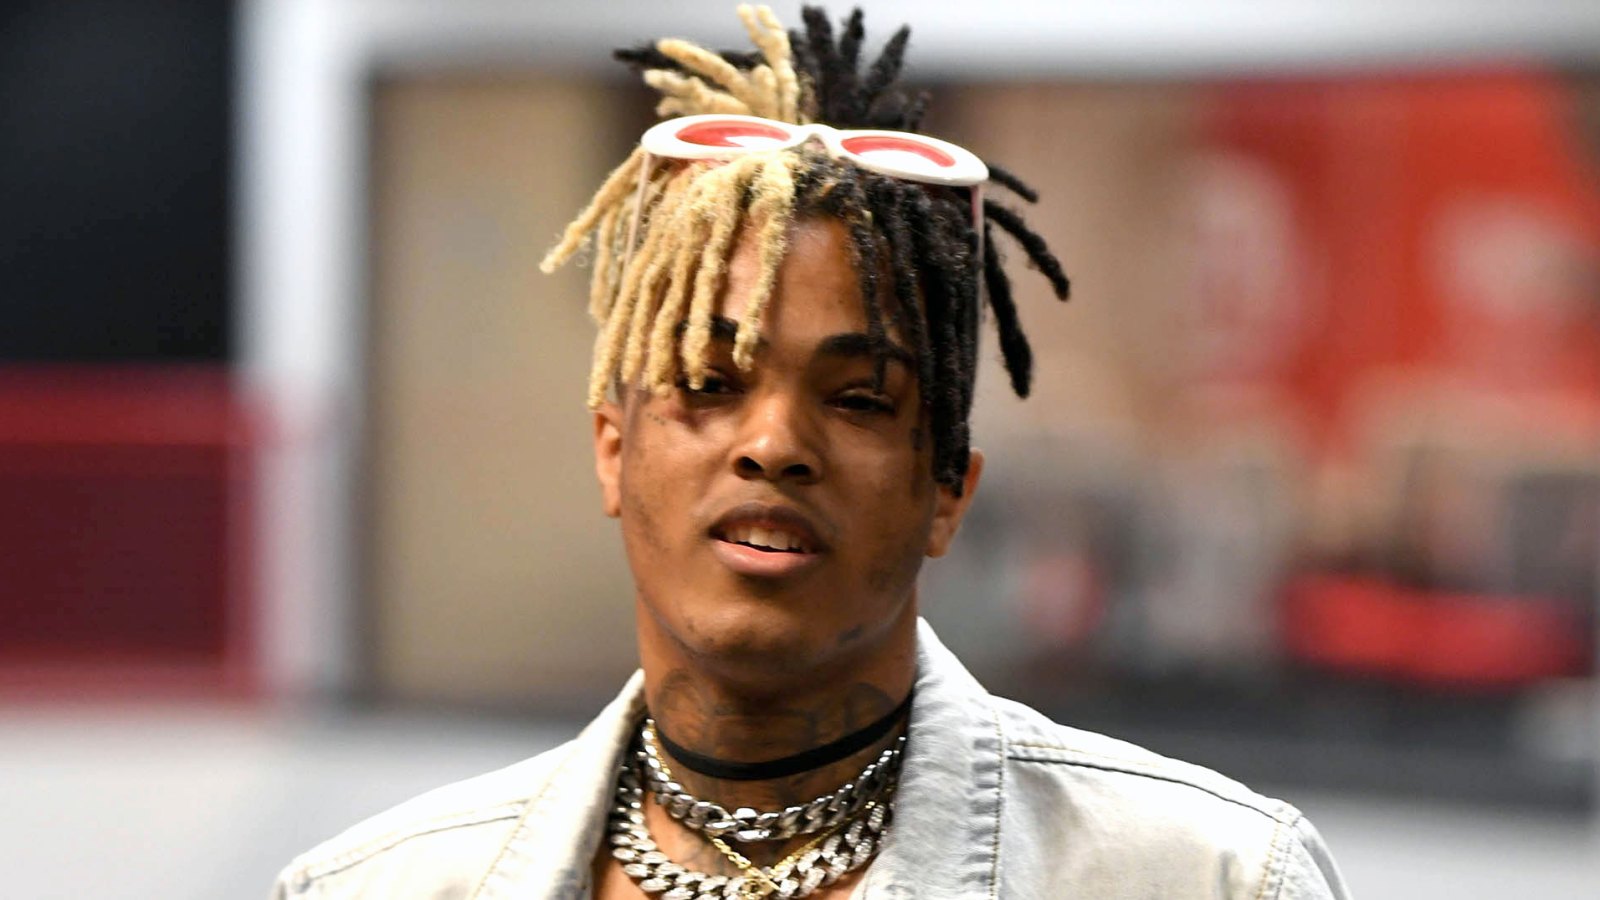 XXXTentaction GF Gives Birth Welcomes Son